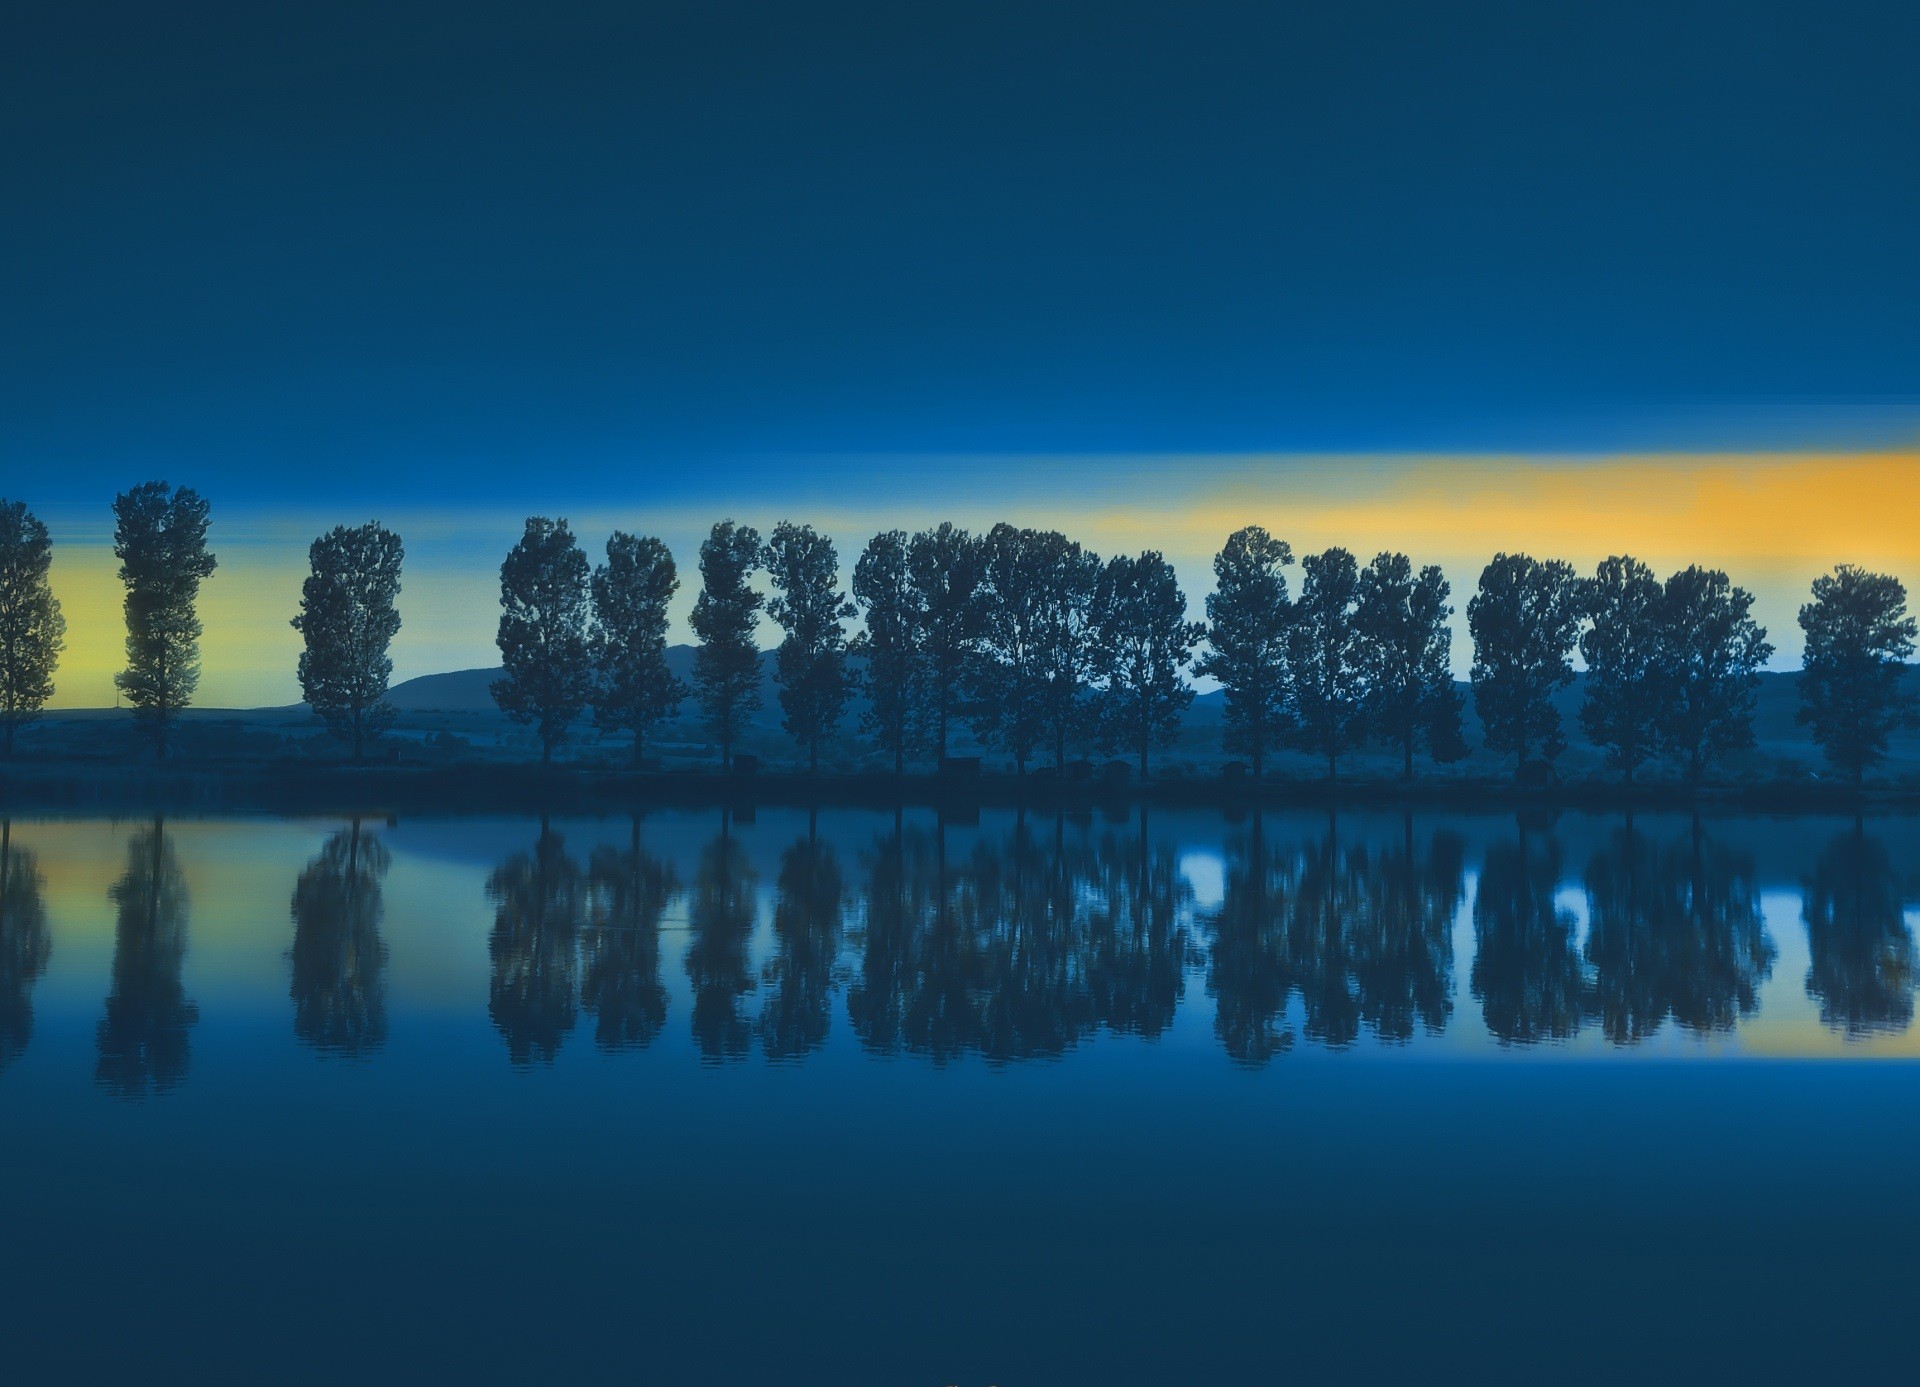 General 1920x1387 lake trees sunset reflection nature outdoors landscape